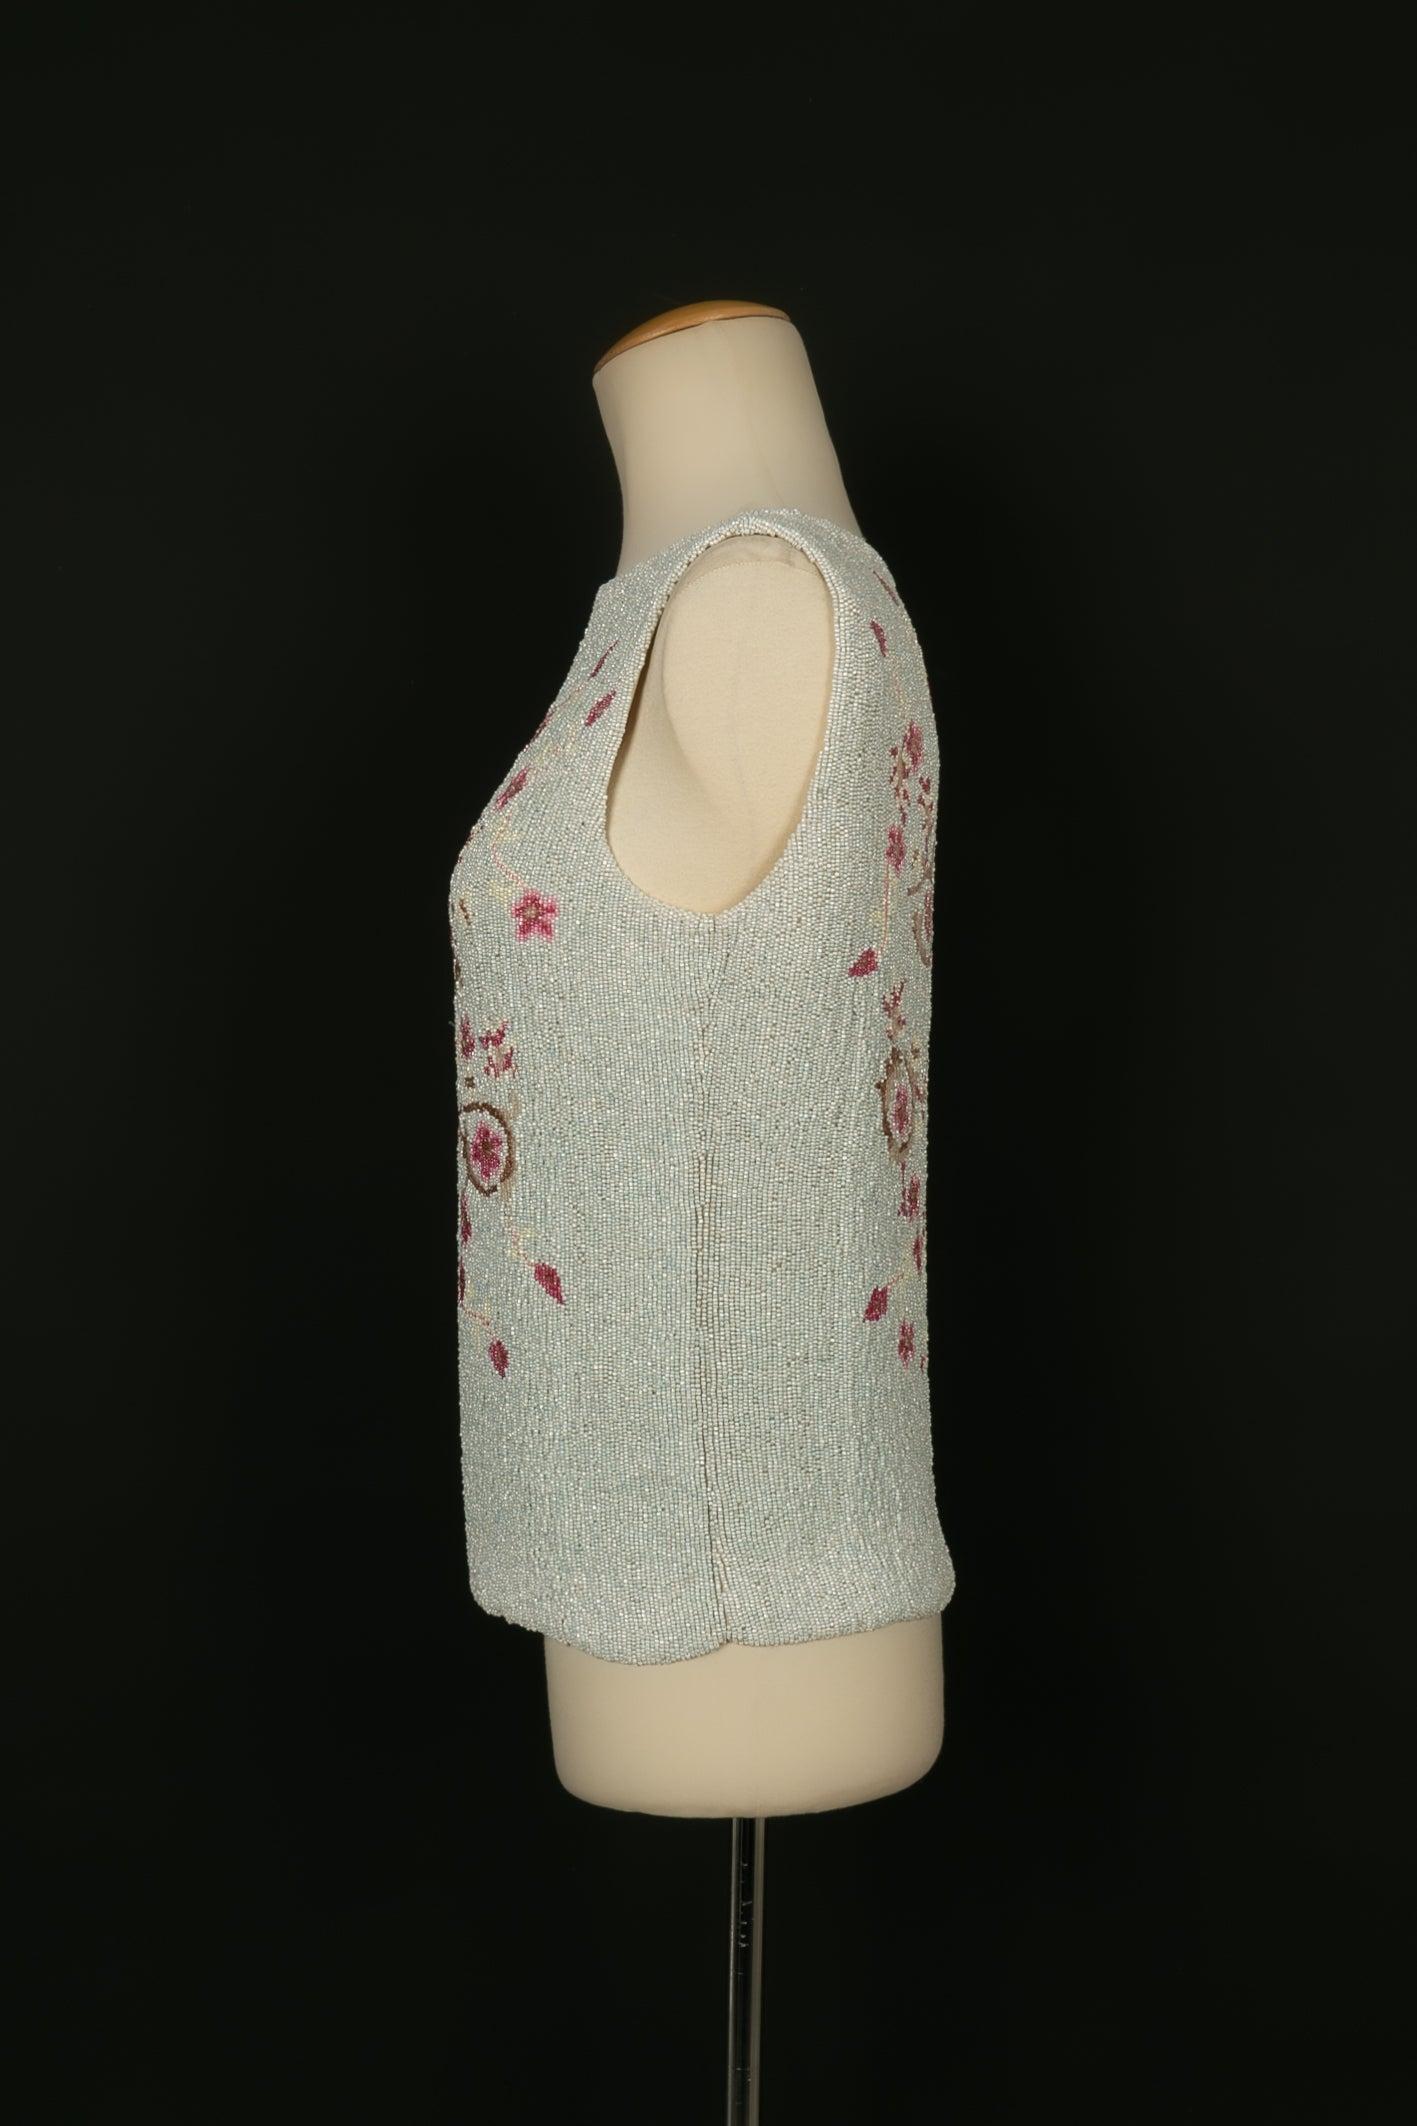 Women's Alberta Ferreti Top with Light Blue and Pink Pearls For Sale